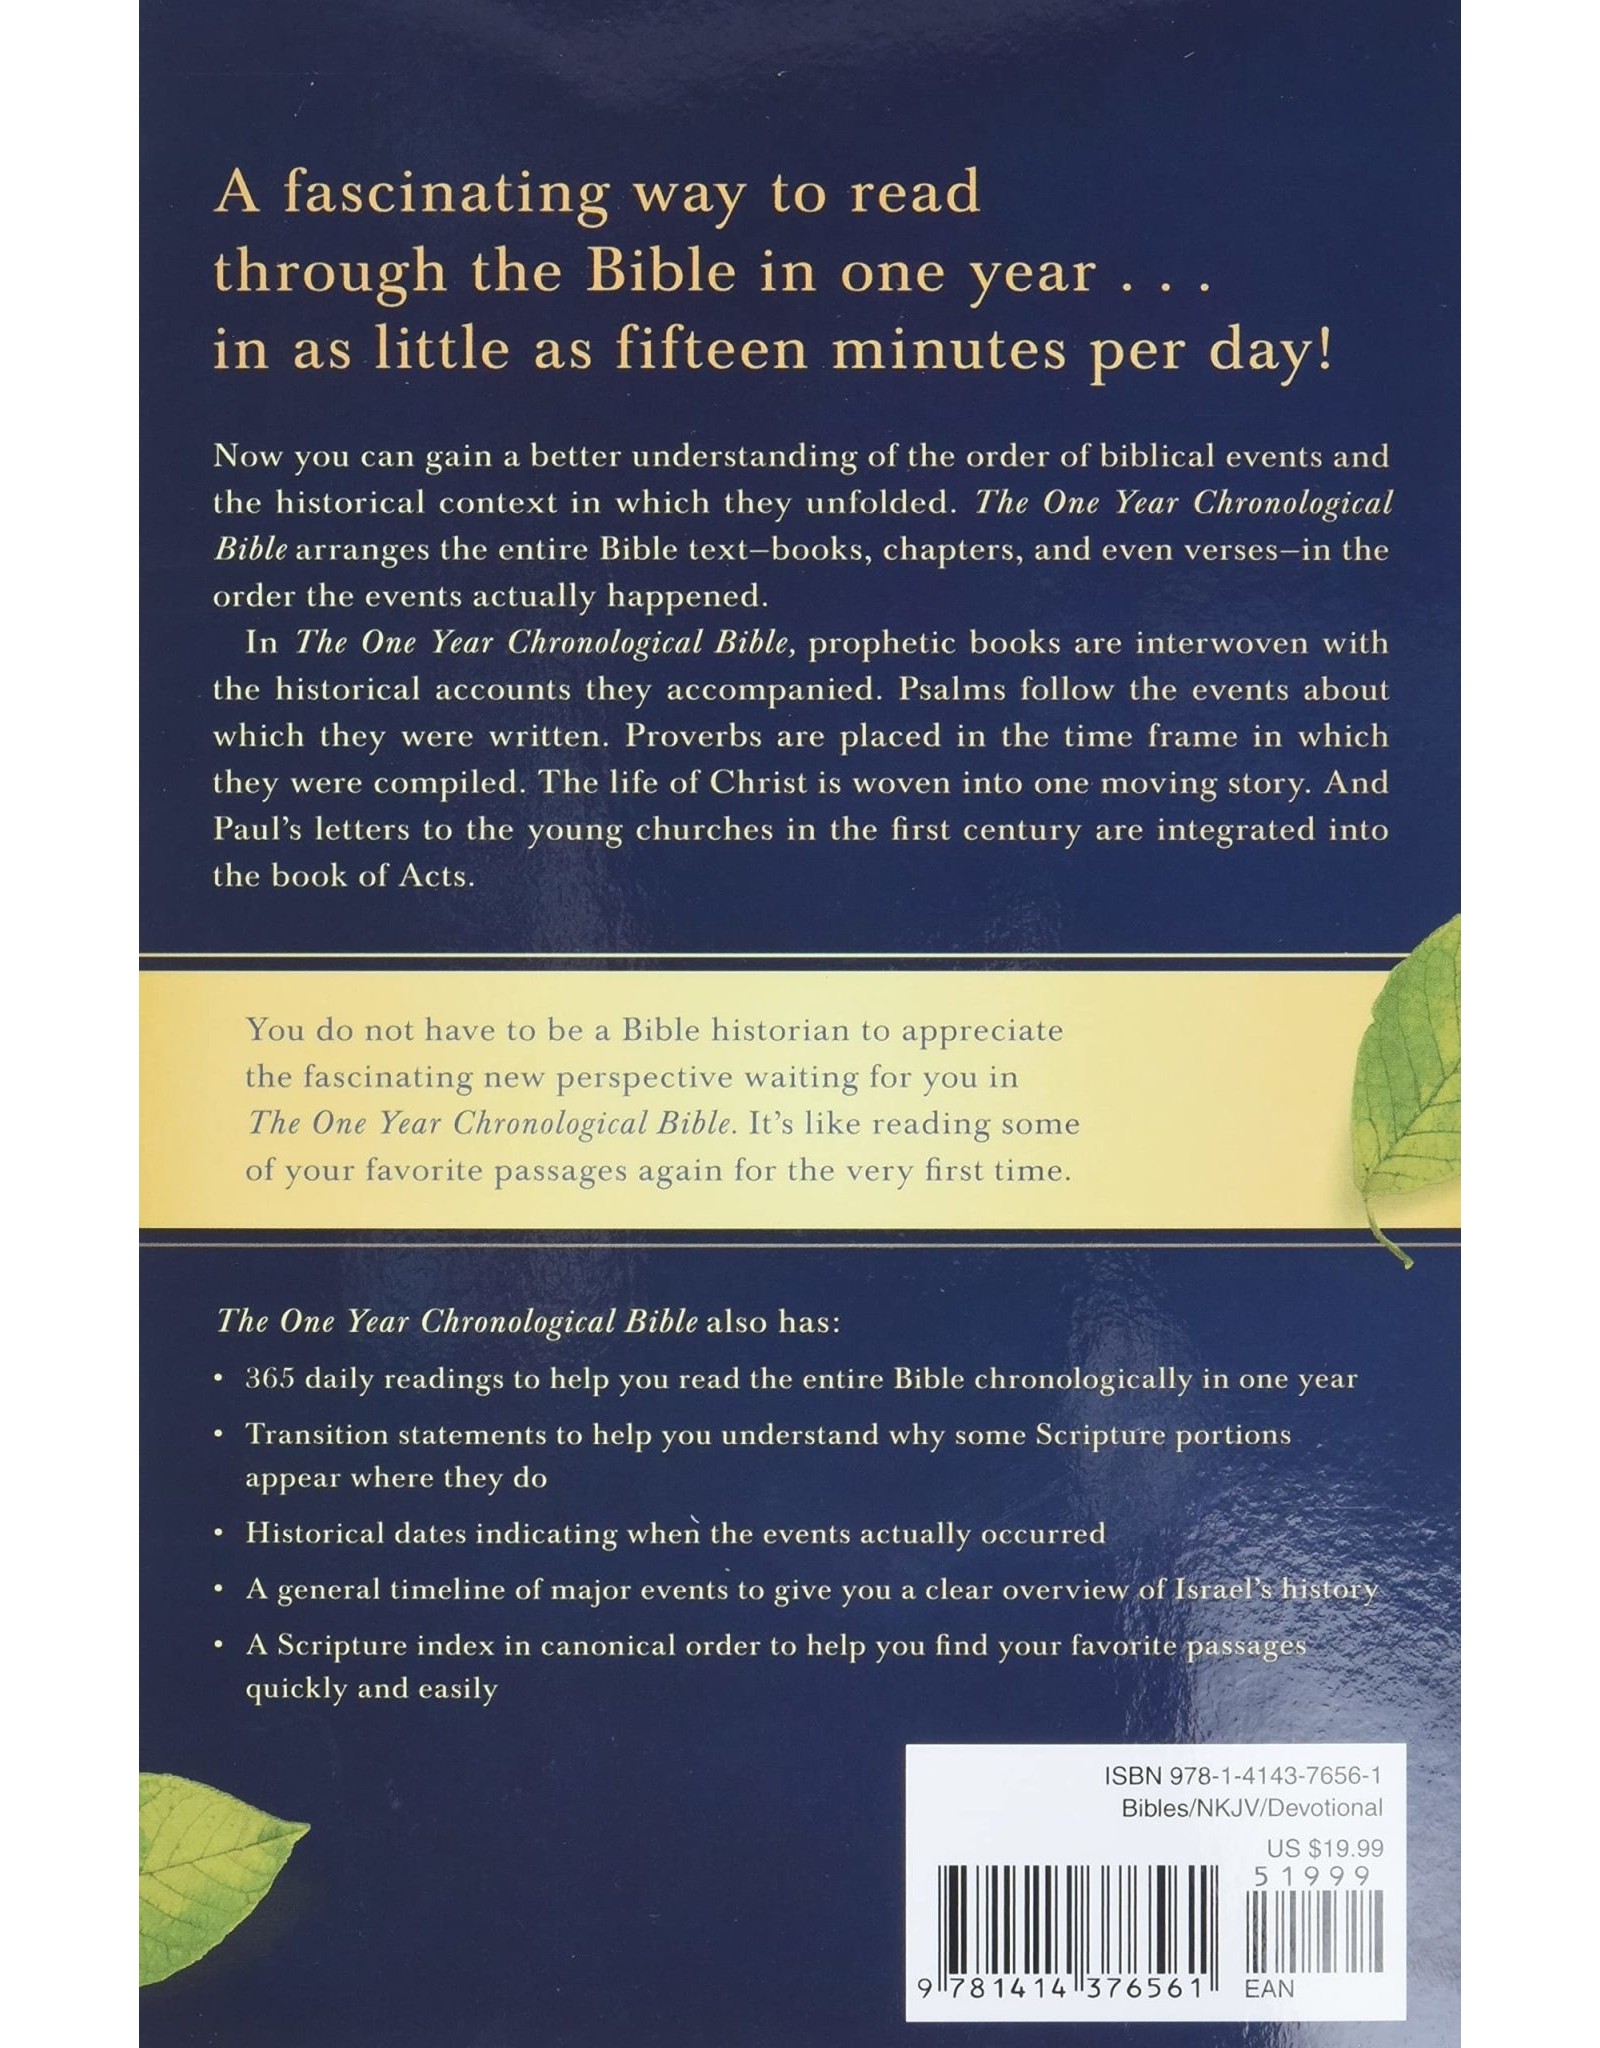 Tyndale House Publishers NKJV One Year Chronological Bible